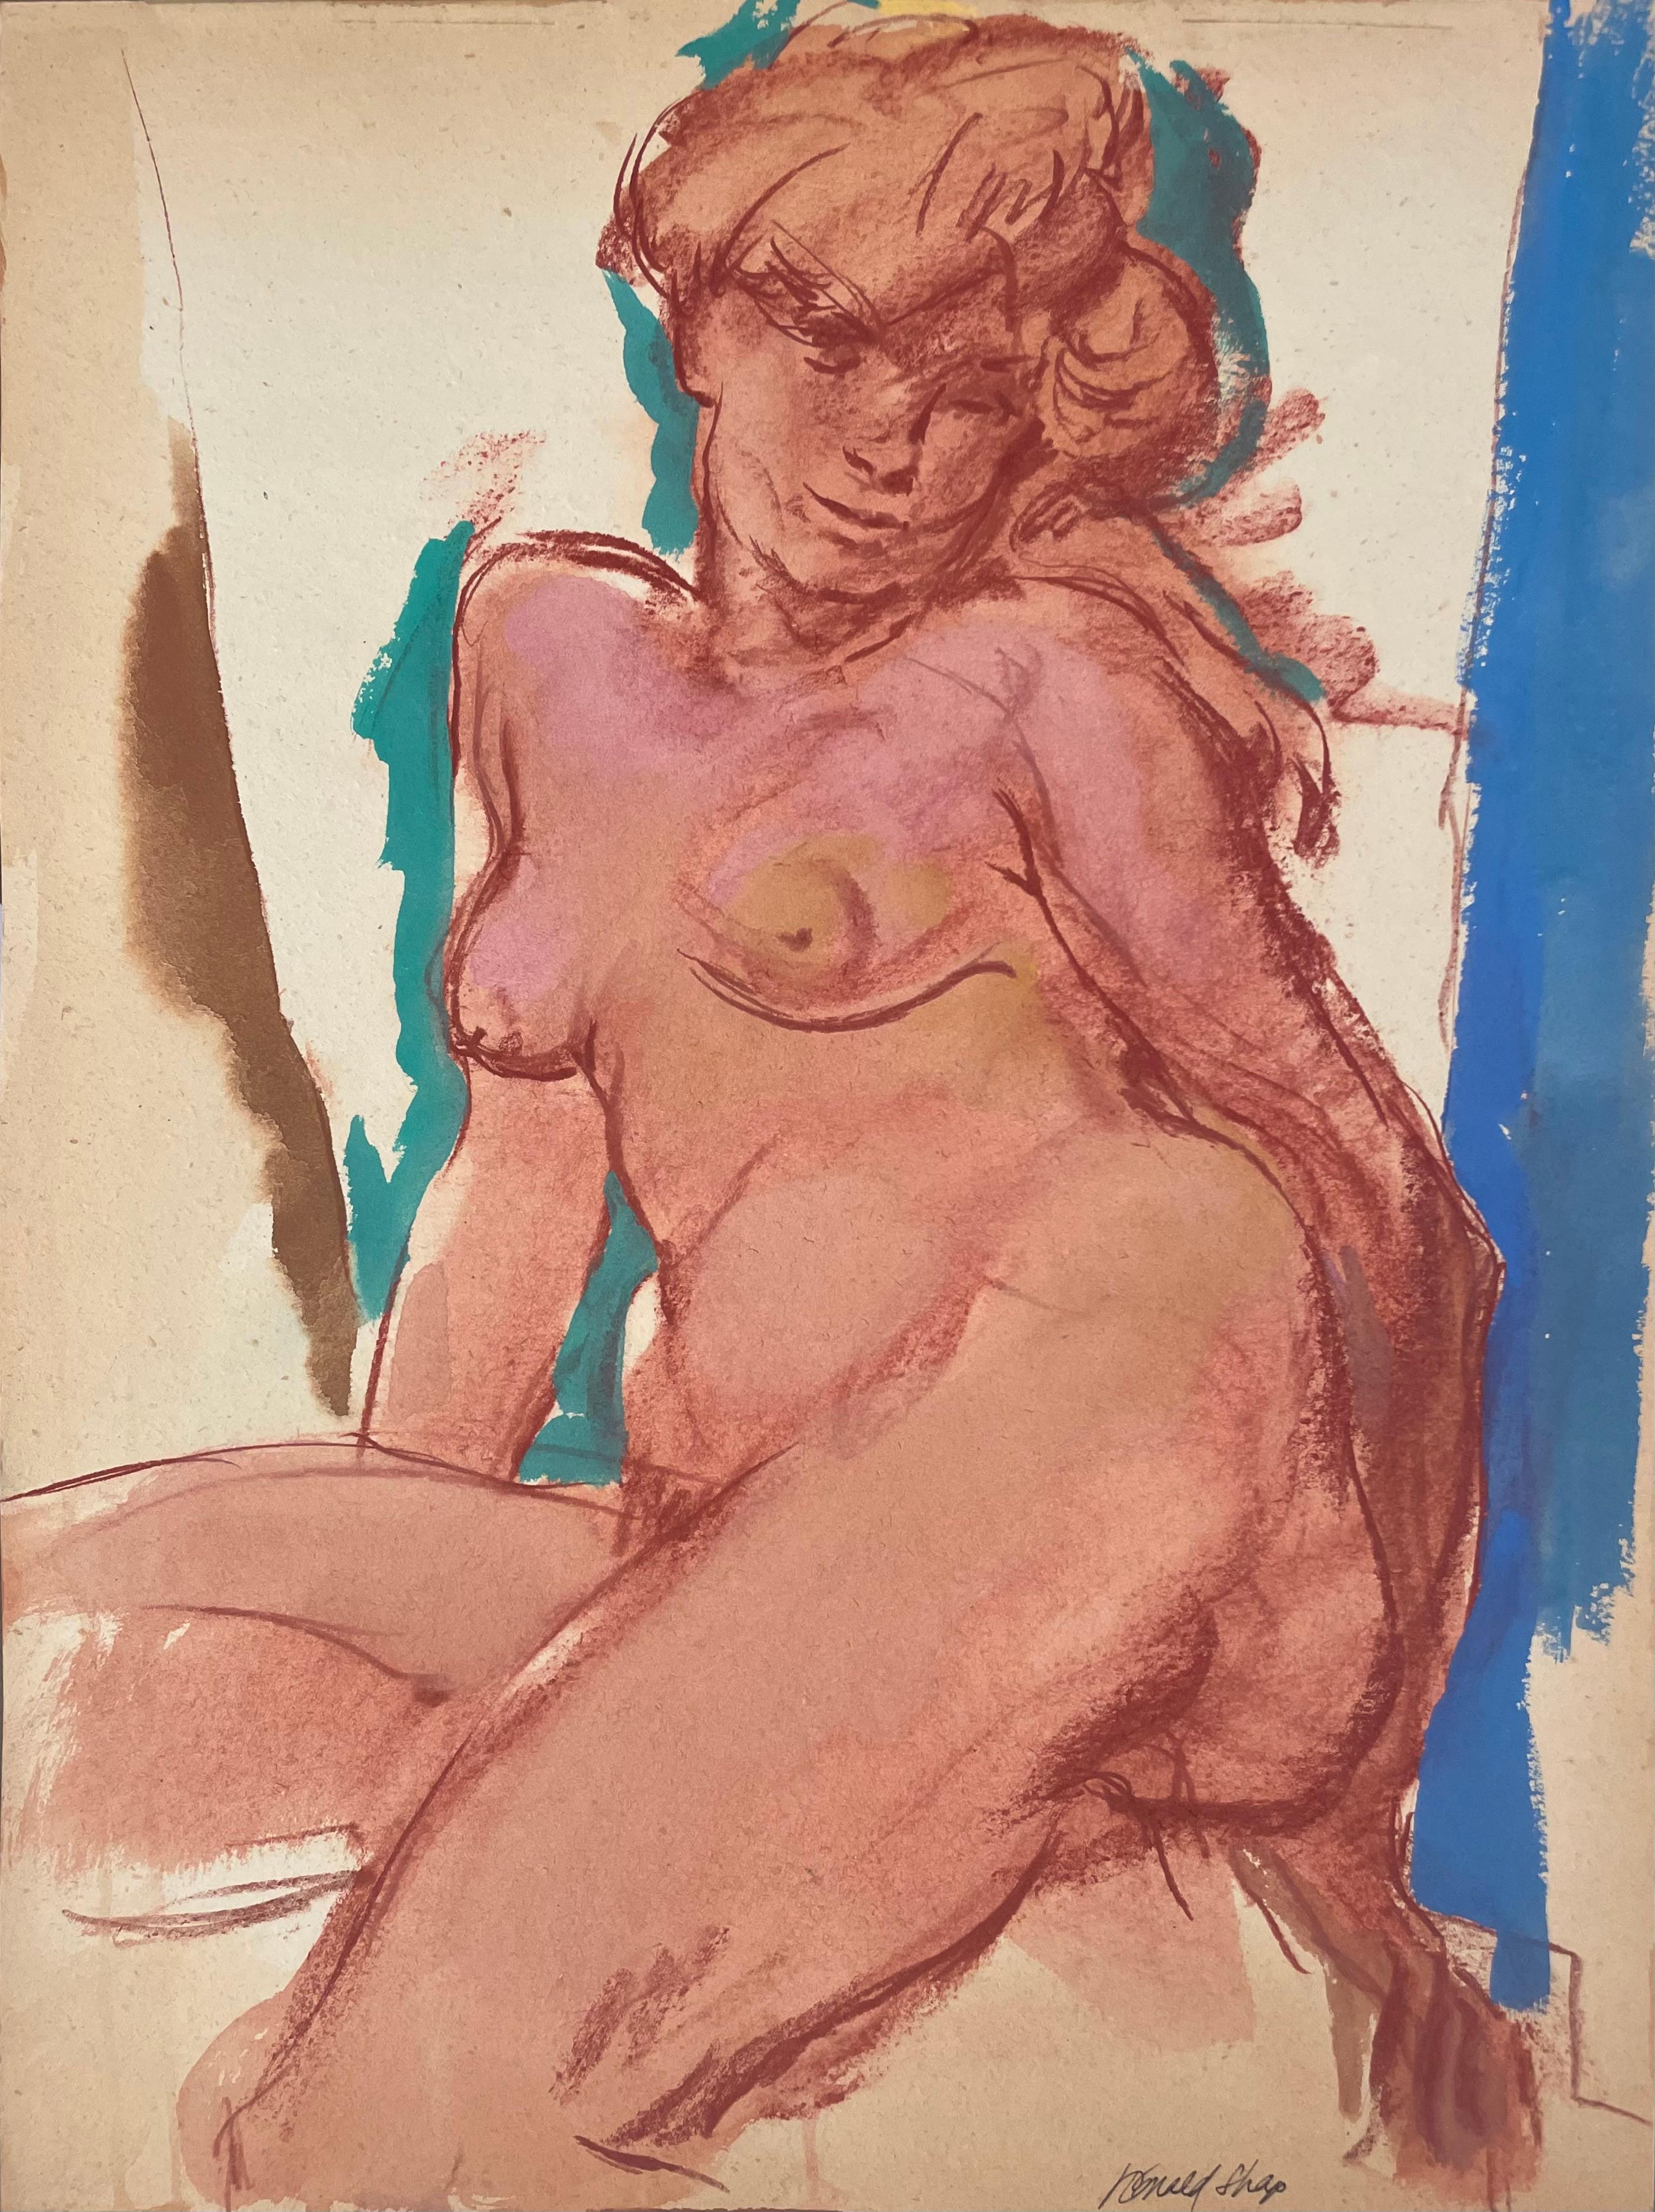 Original oil pastel and gouache figure drawing by celebrated, twentieth-century California landscape painter, Ronald Shap. Sketch of woman sitting with colors of teal, cobalt blue and warm red-pink. 24x18 inches on paper. Signed.

Marks on top edge